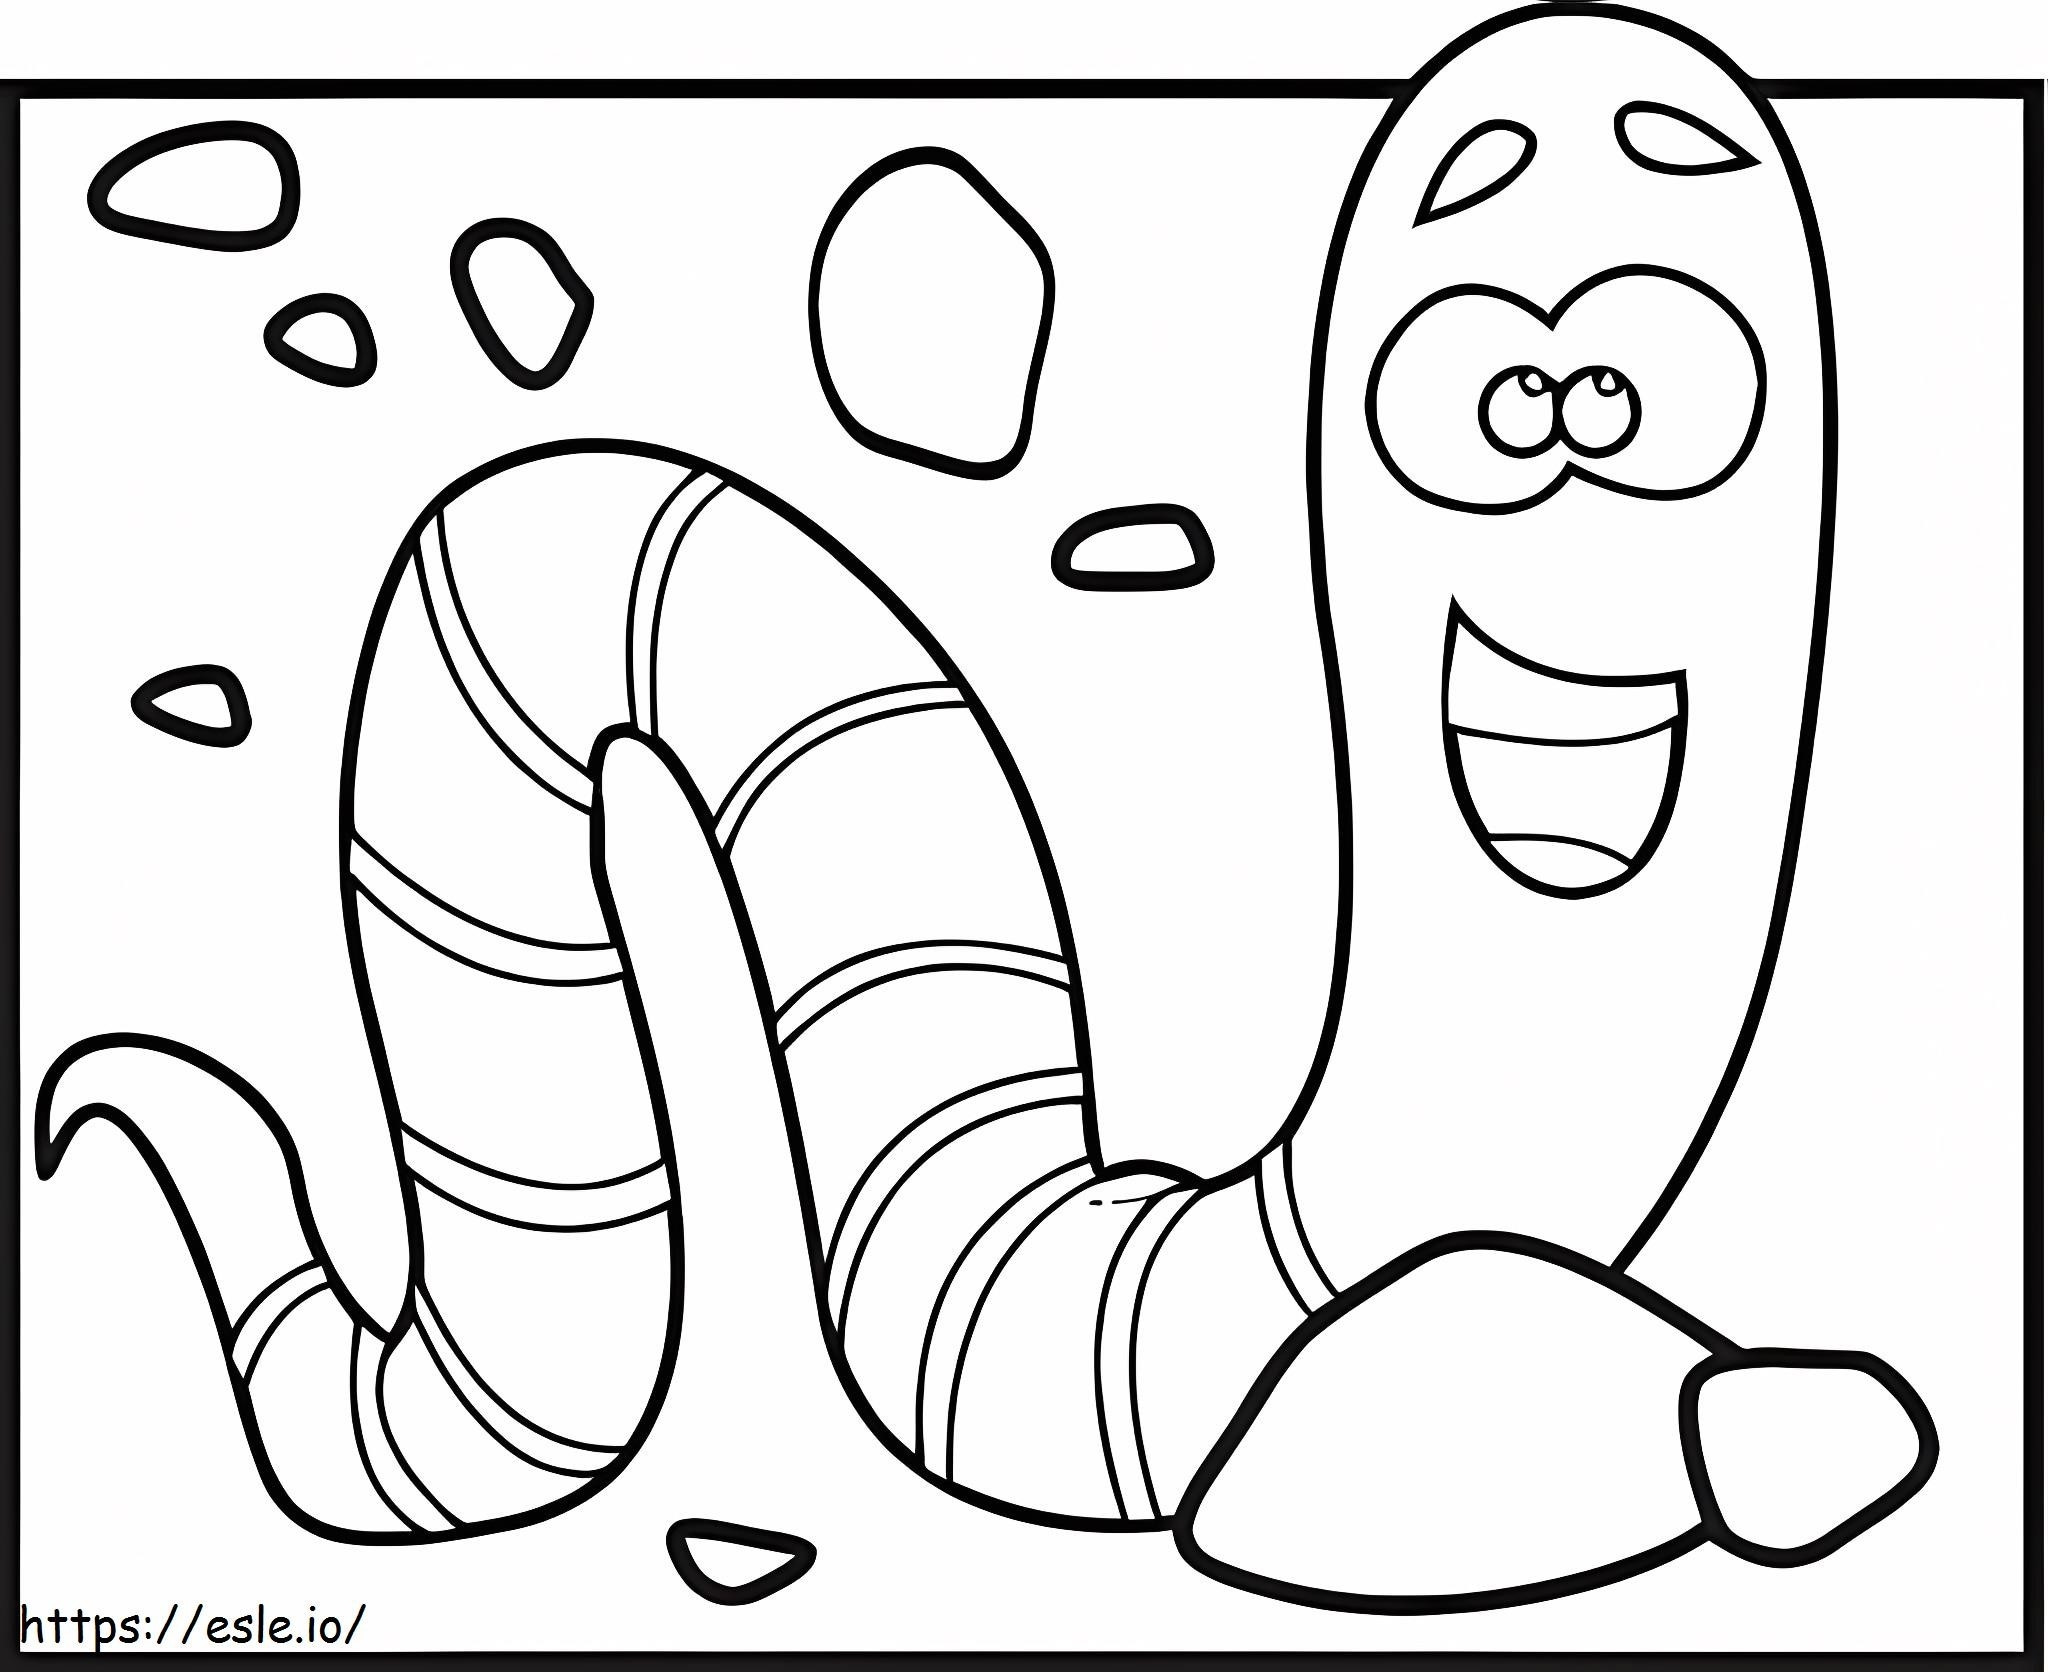 Awesome Worm coloring page